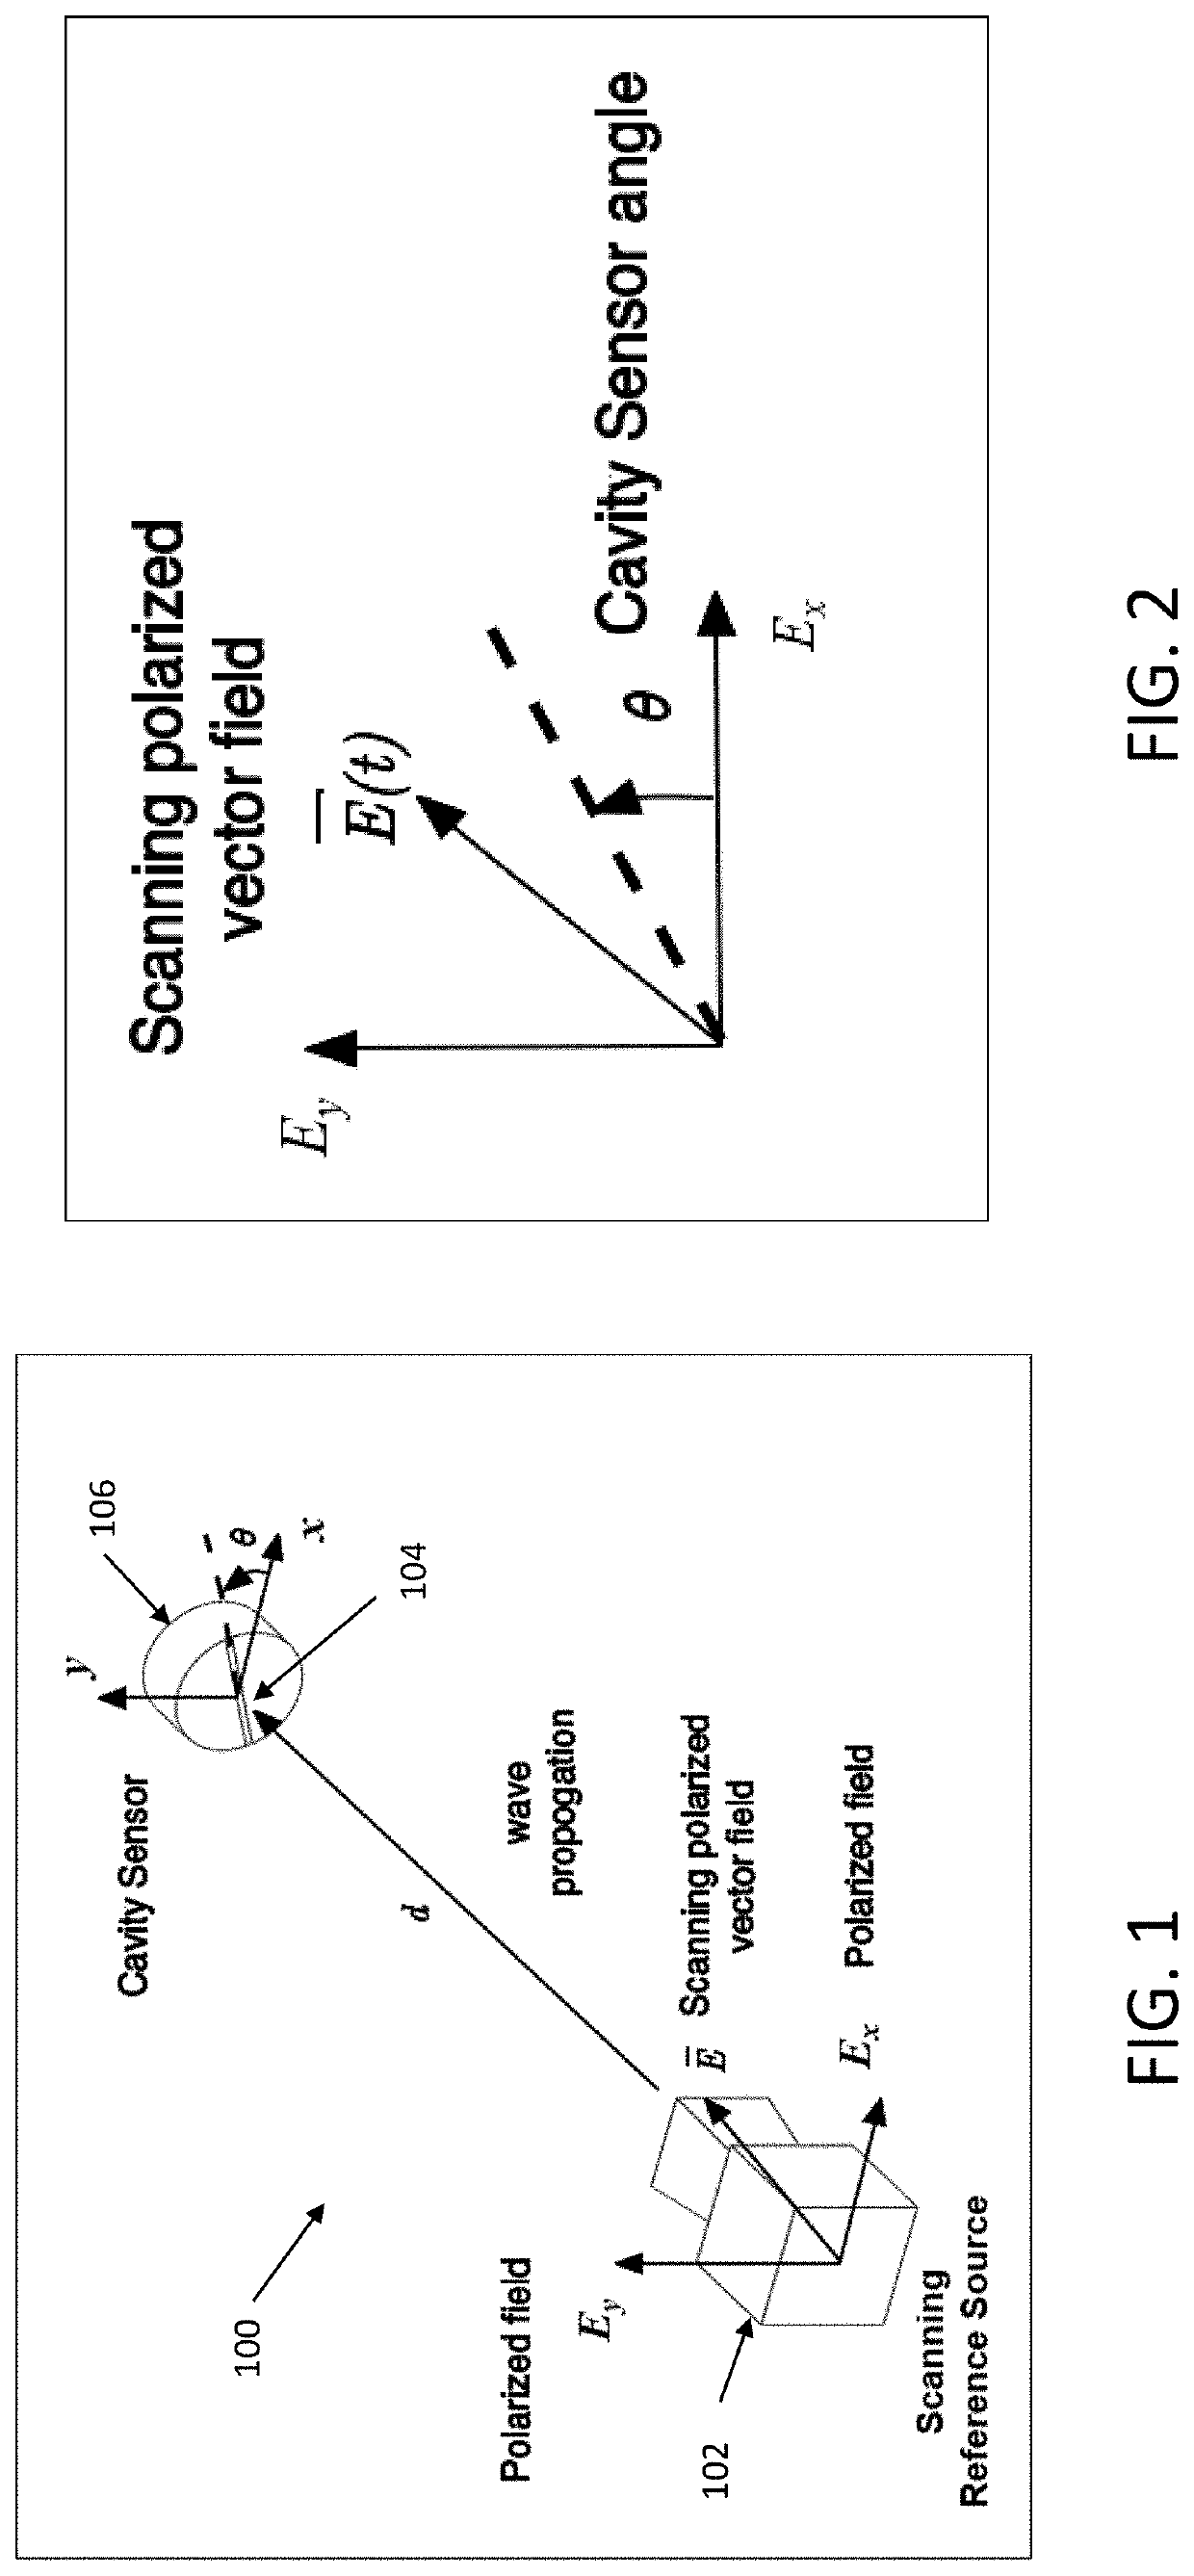 Non-GPS methods and devices for refueling remotely piloted aircraft